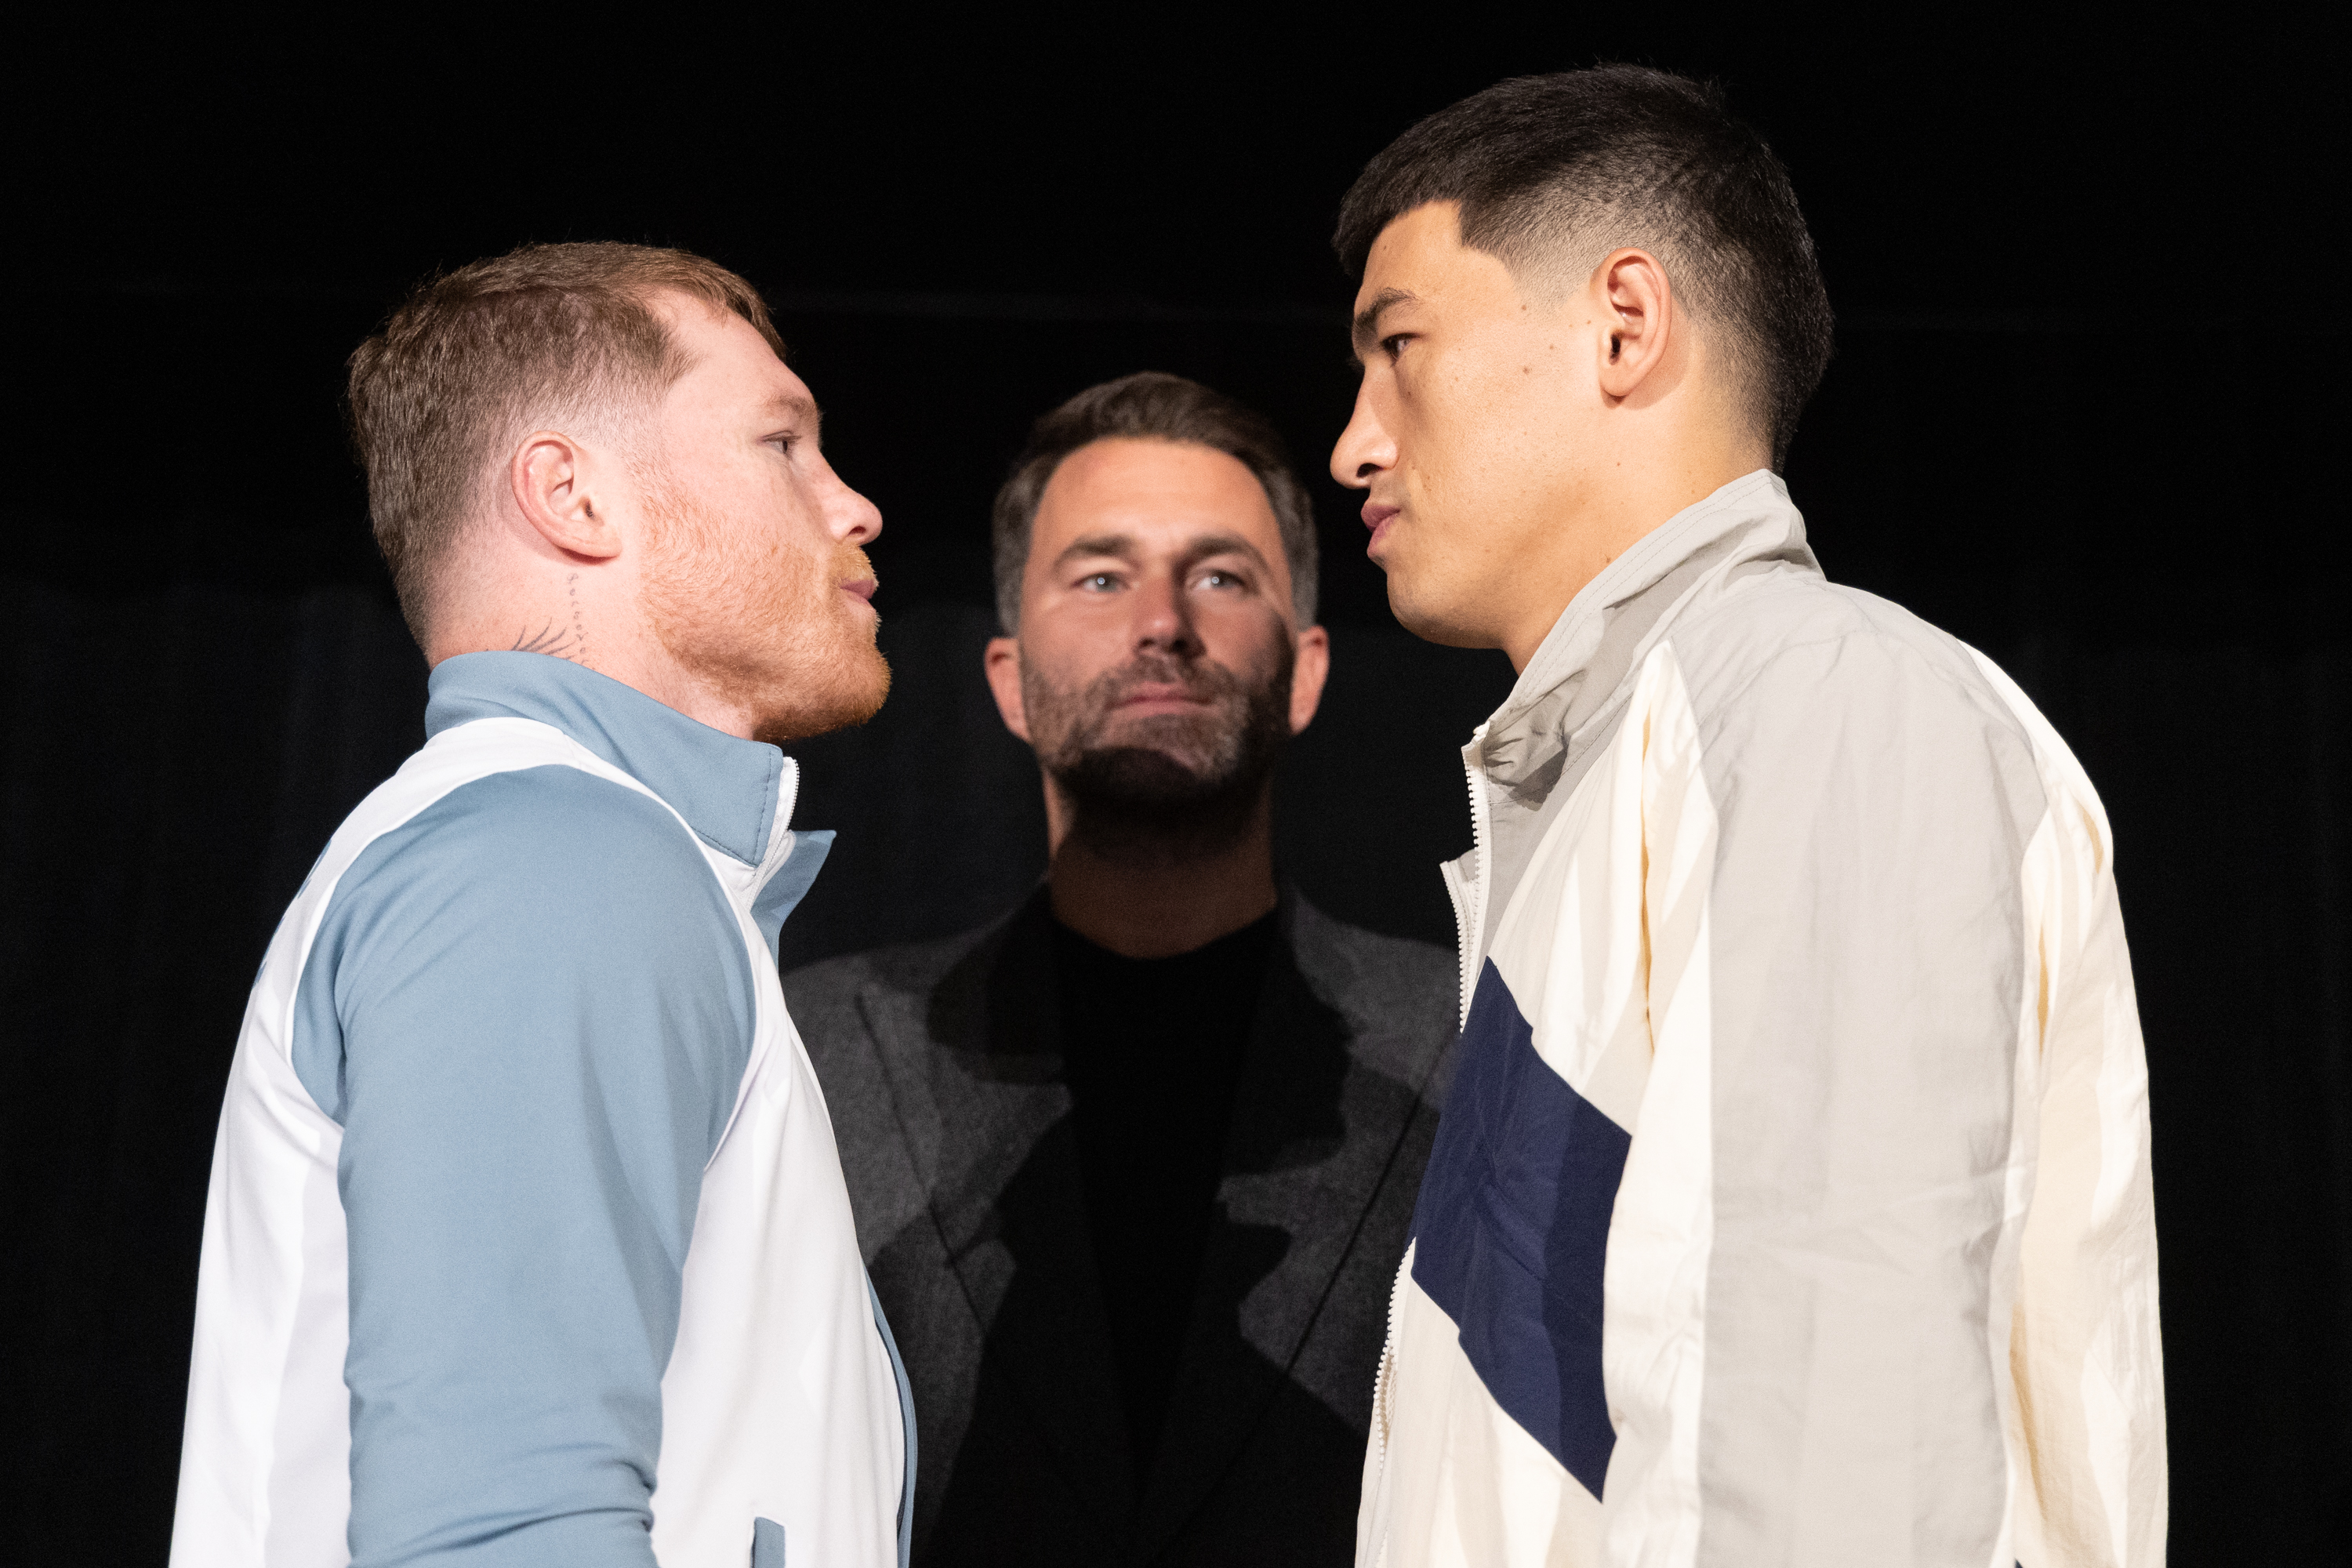 Canelo Alvarez and Dmitry Bivol weigh in today ahead of Saturday’s fight